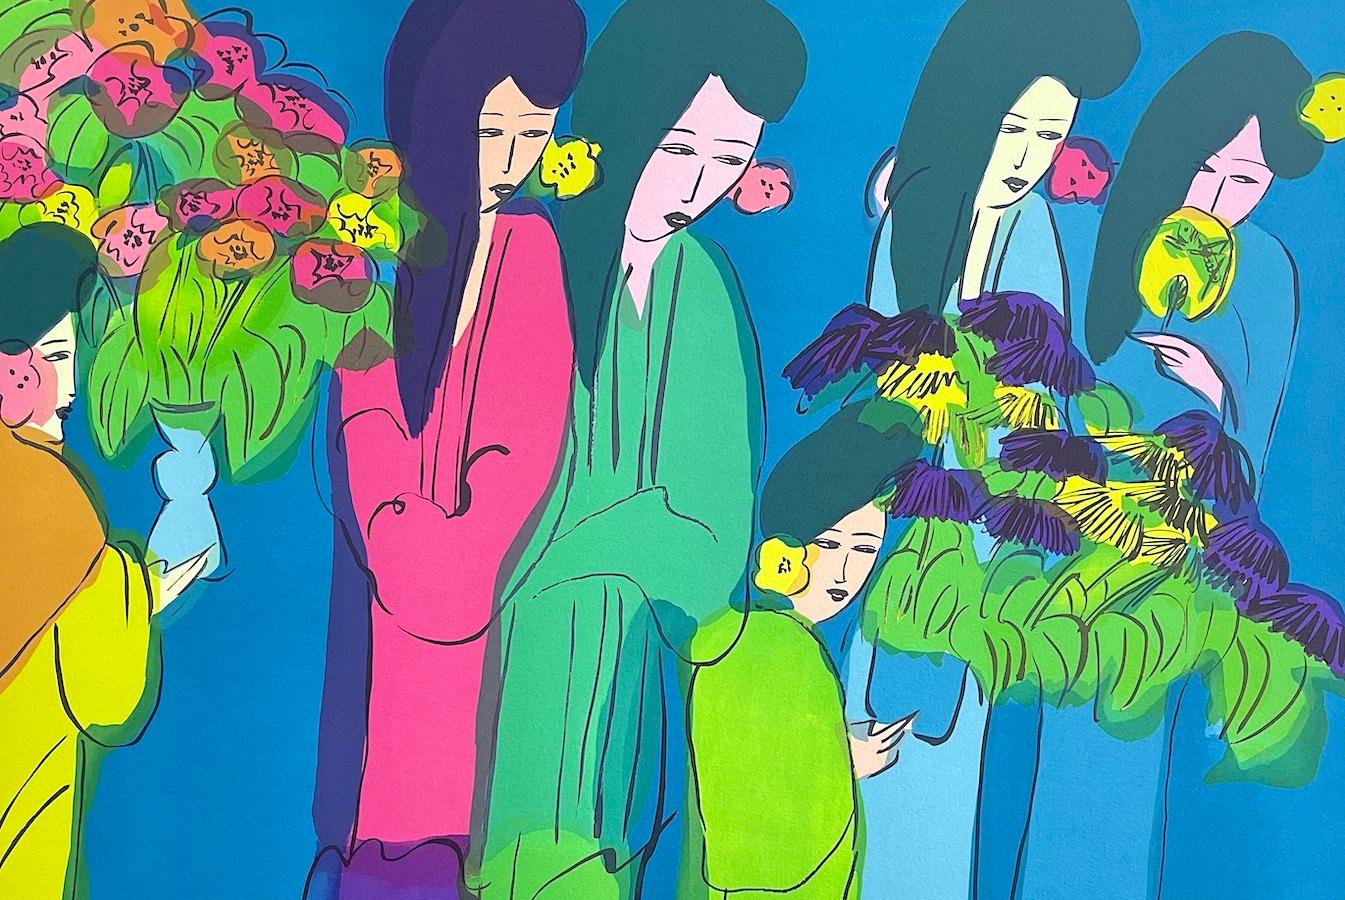 SIX GEISHA WITH FLOWERS Signed Lithograph Asian Women Kimonos Flowers Teal Blue - Print by Walasse Ting